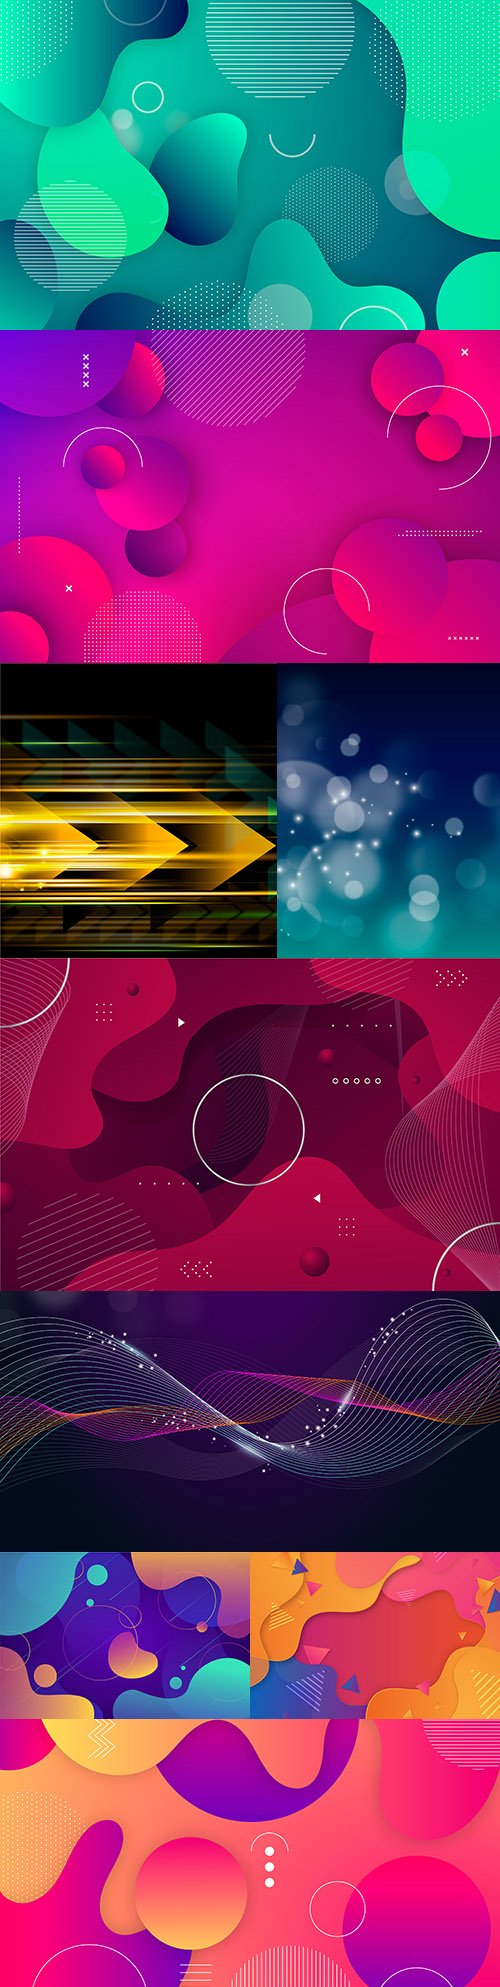 Colorful wavy background gradient abstract design 2